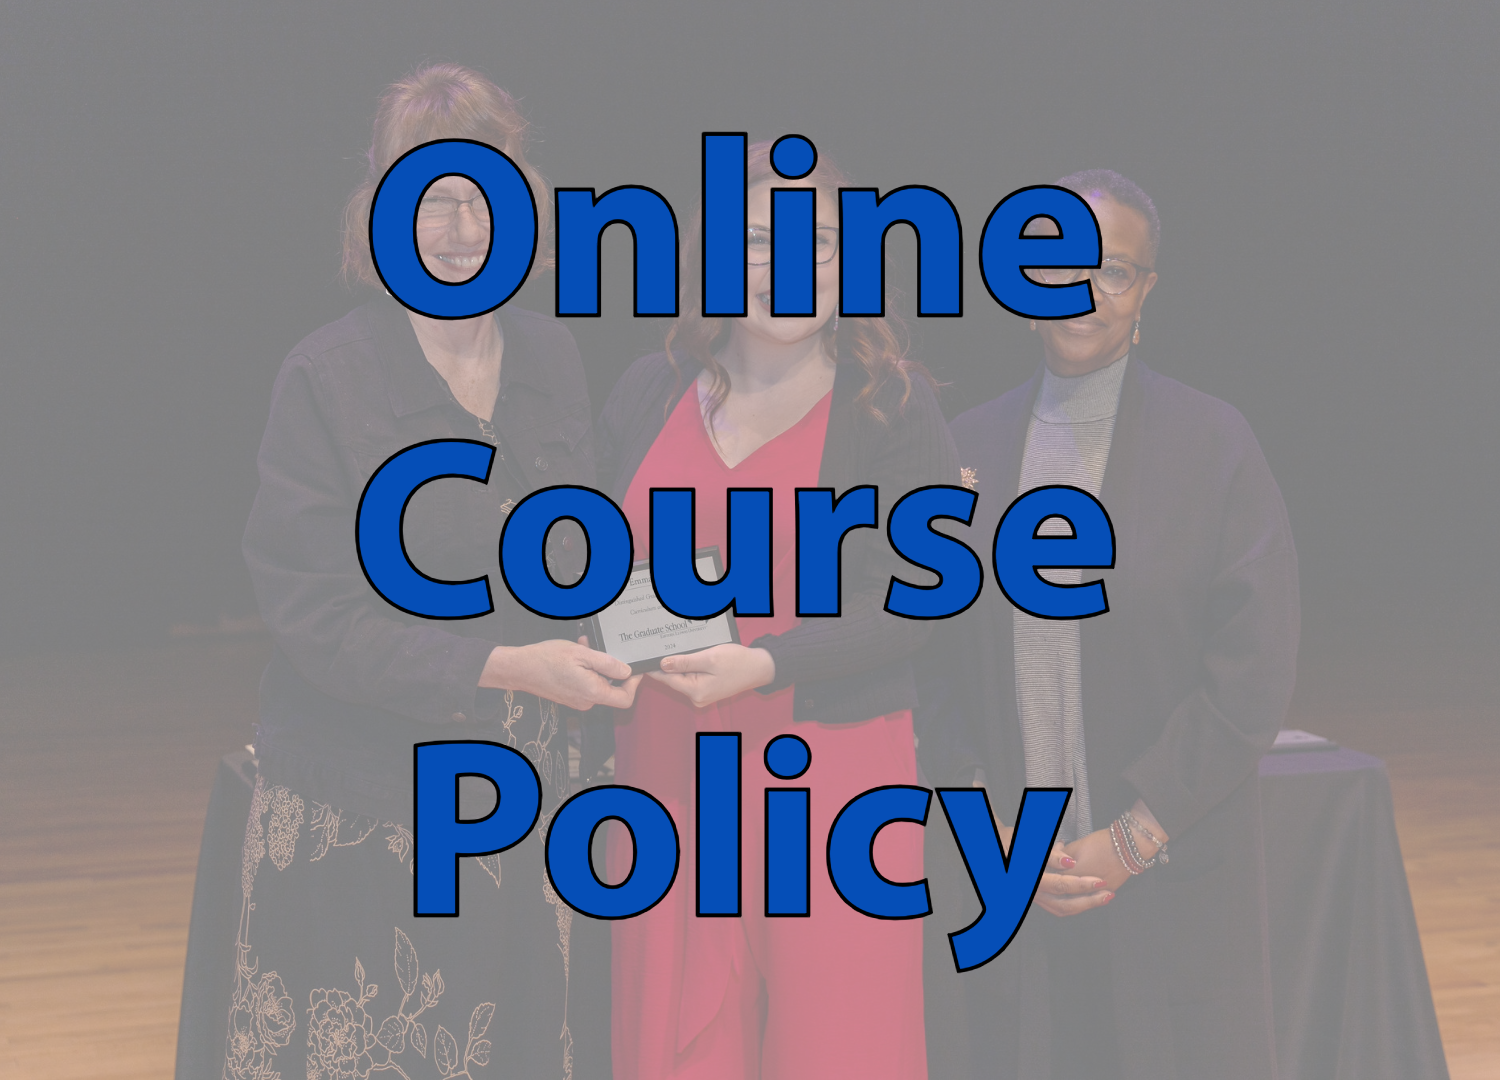 Online Course Policy